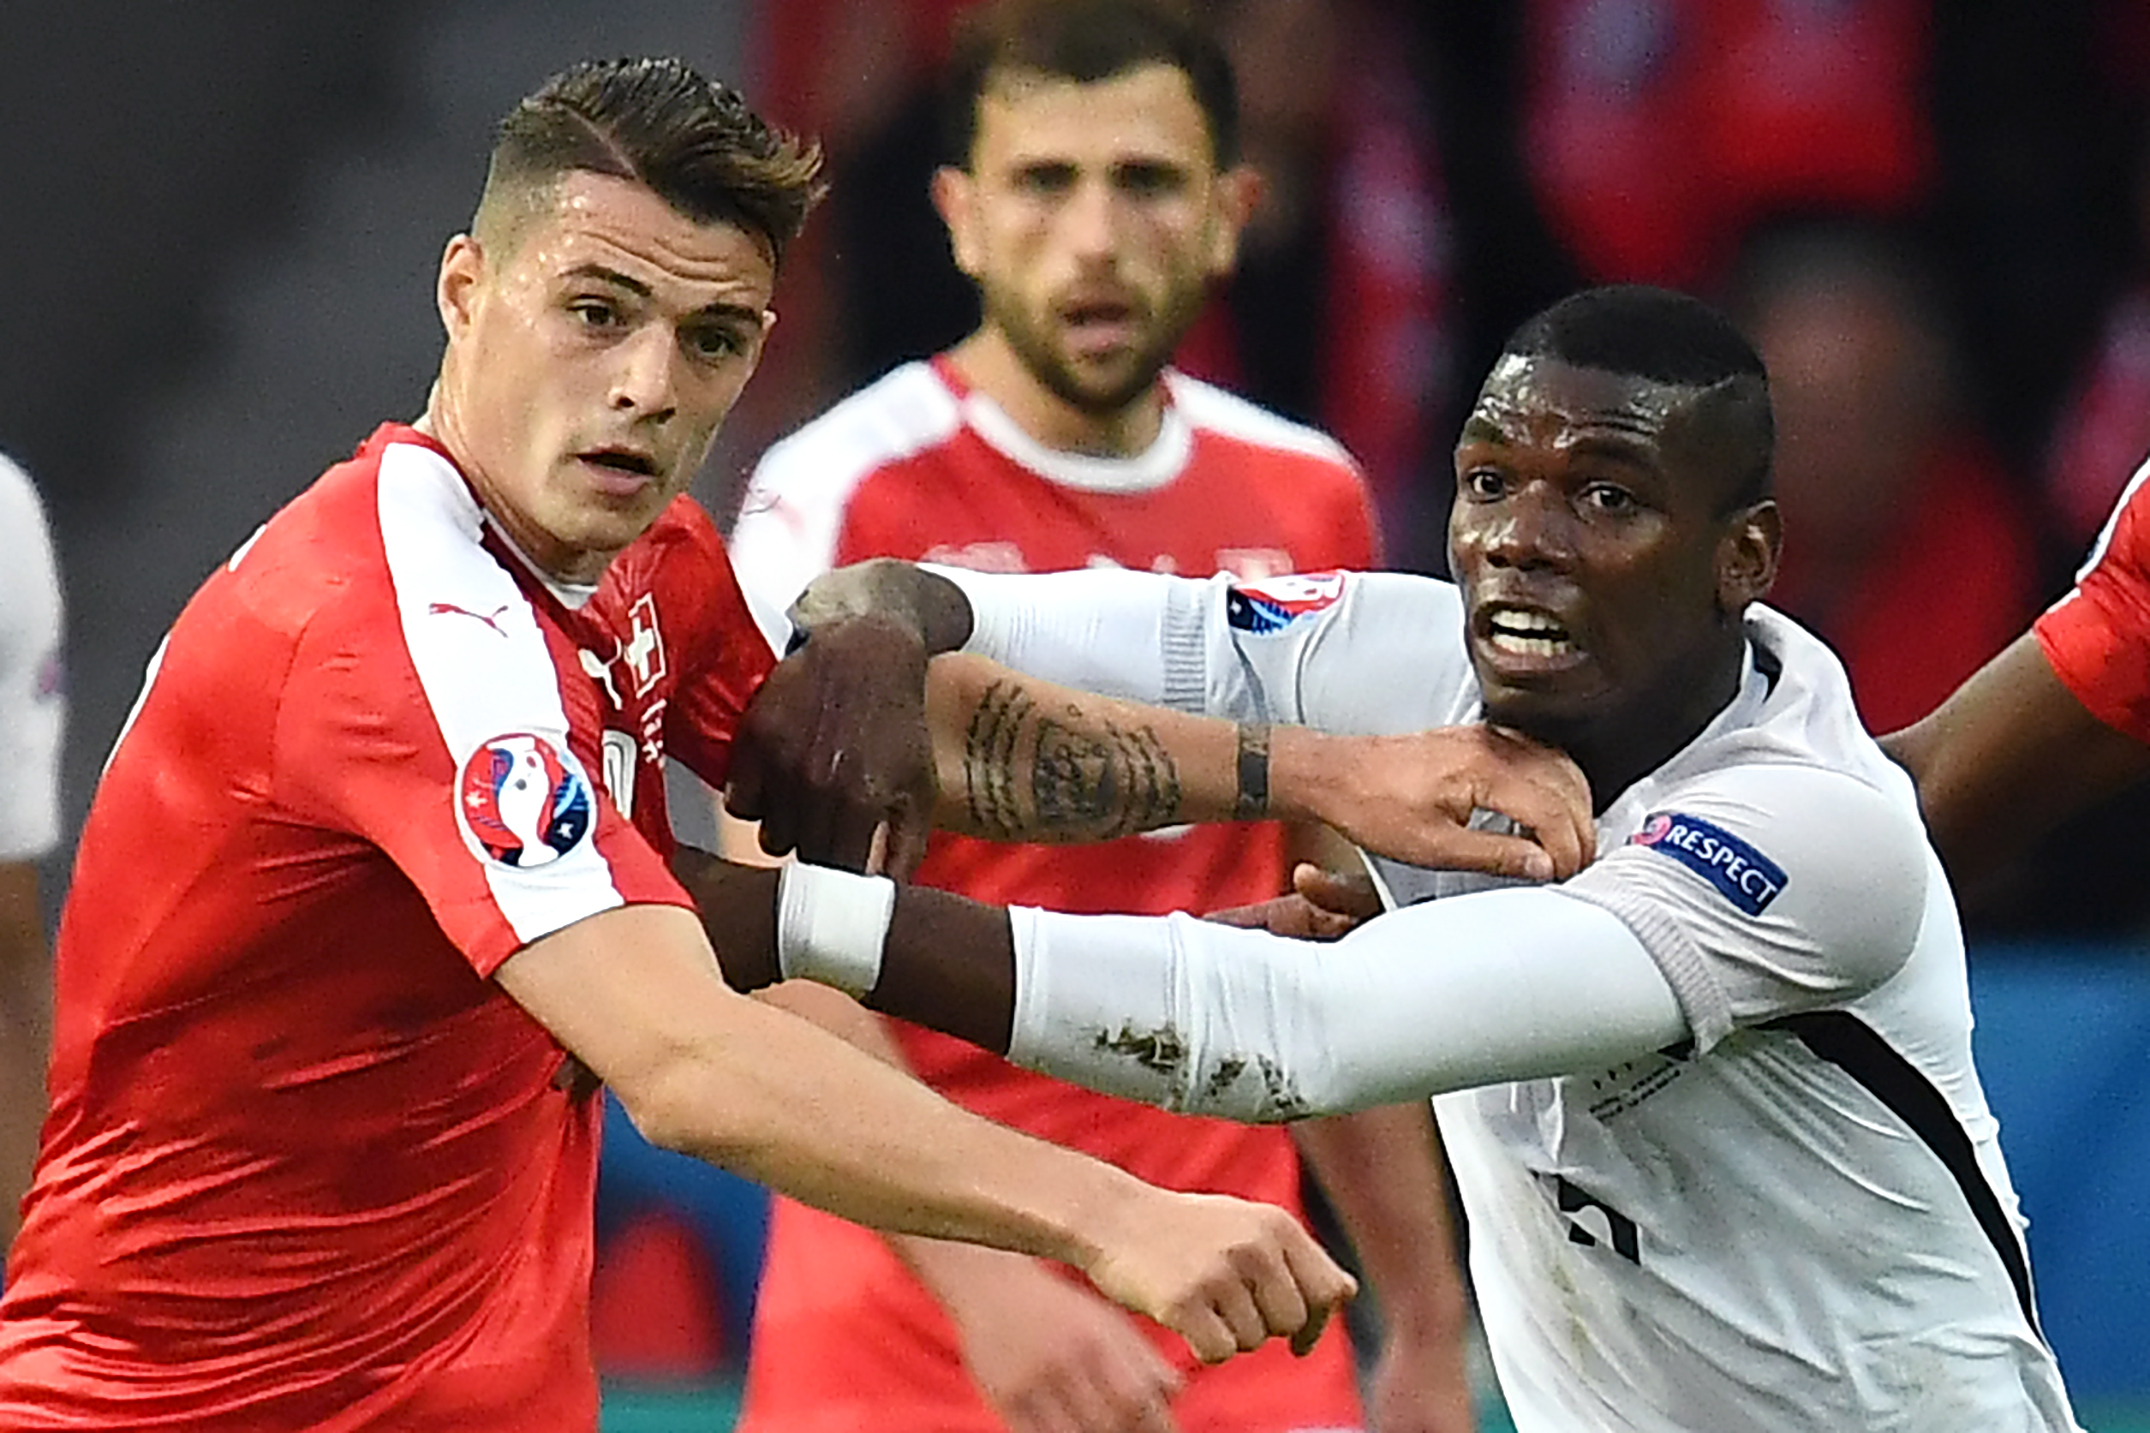 Switzerland's midfielder Granit Xhaka (L) vies for the ball against France's midfielder Paul Pogba during the Euro 2016 group A football match between Switzerland and France at the Pierre-Mauroy stadium in Lille on June 19, 2016. / AFP / FRANCK FIFE        (Photo credit should read FRANCK FIFE/AFP/Getty Images)